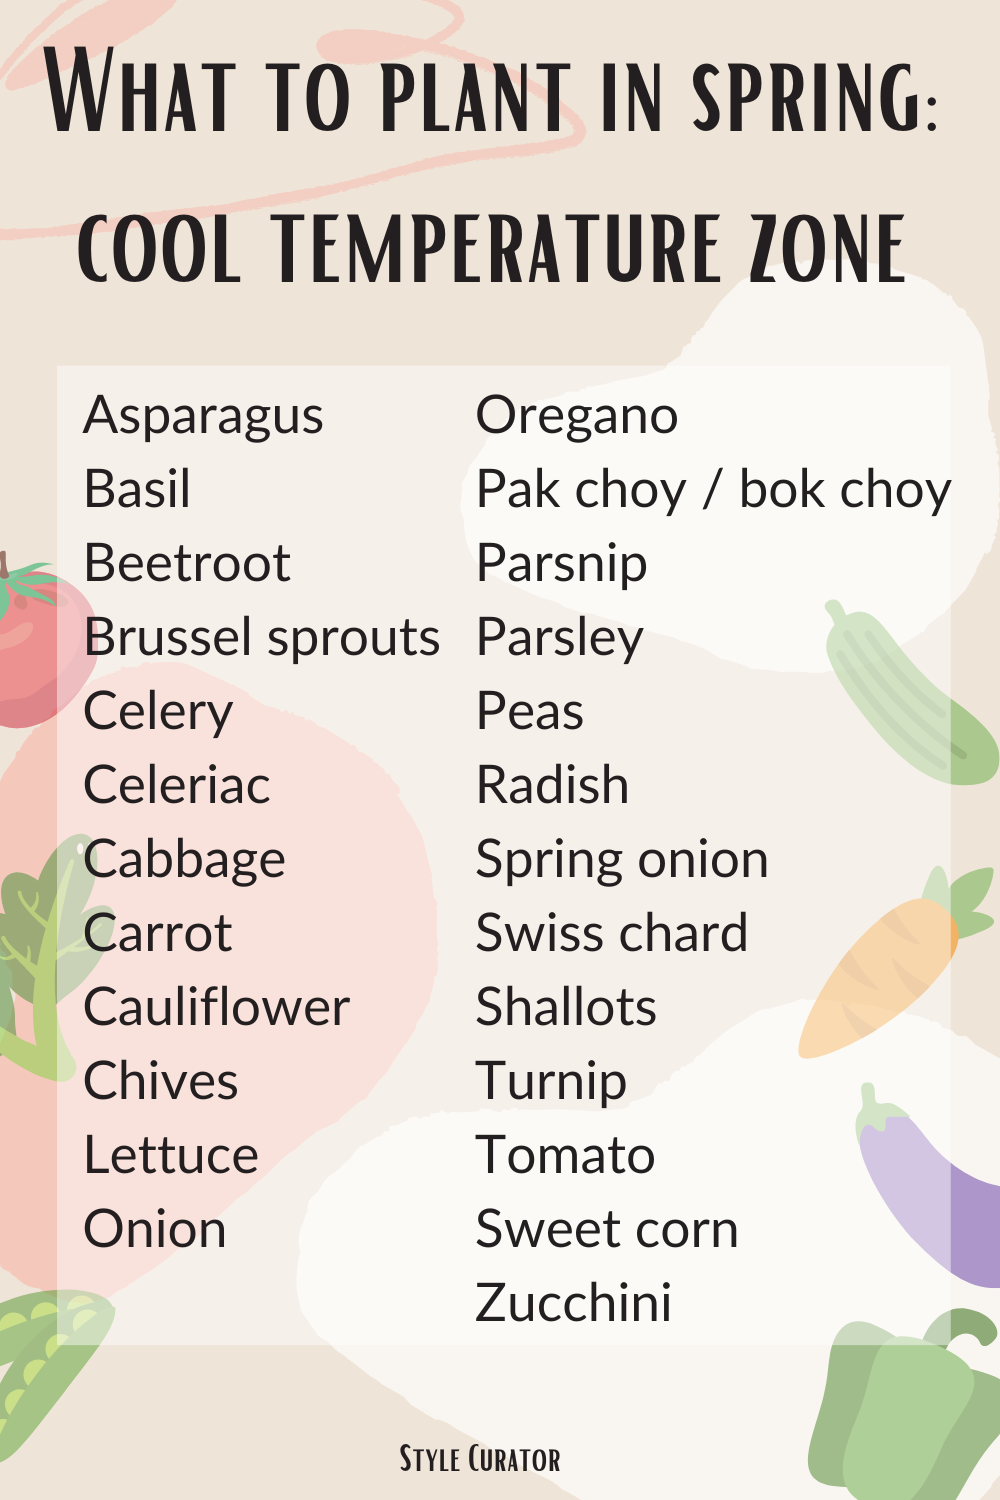 What to plant in spring in Australia - cool climate zone